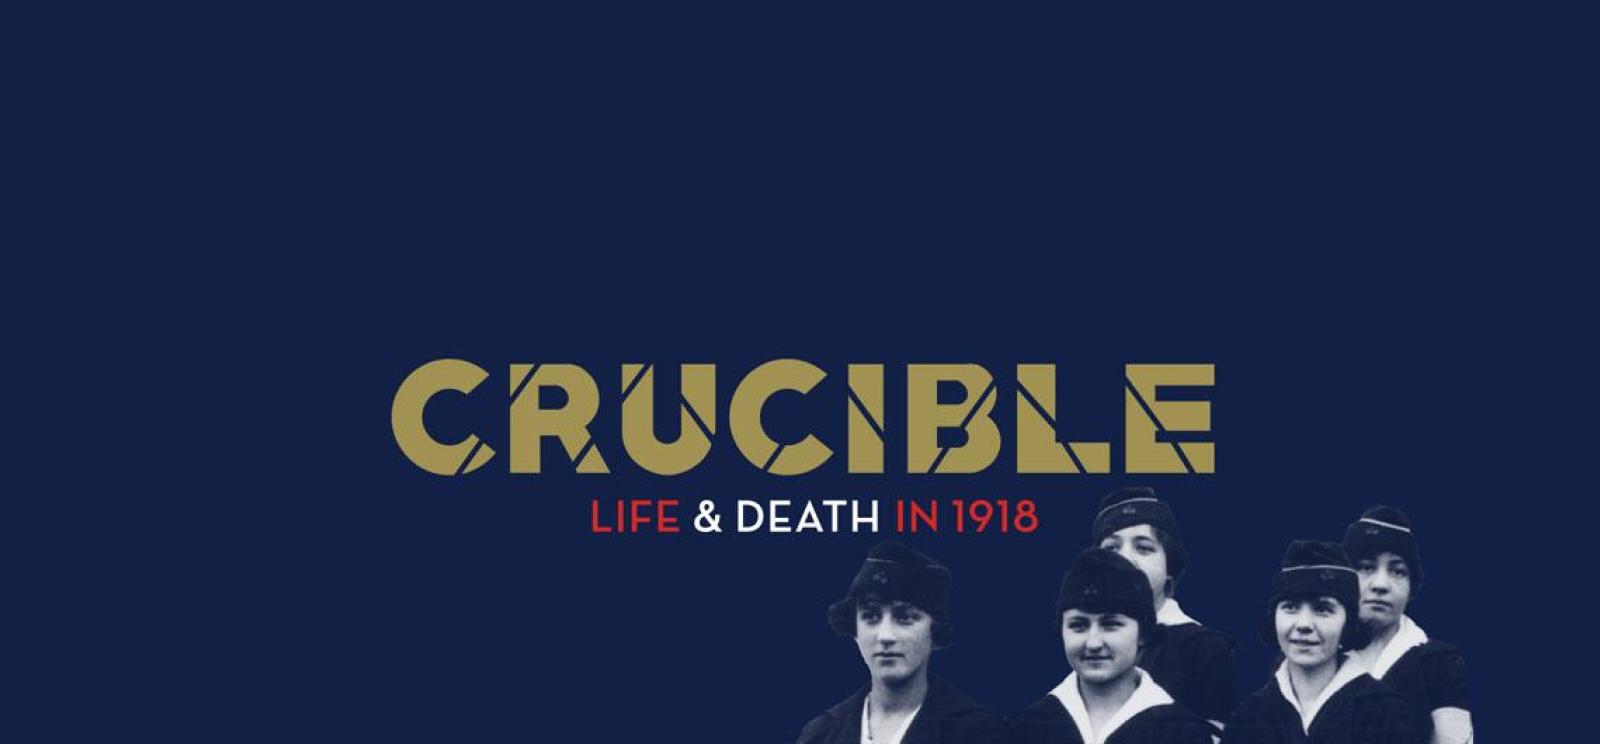 Background: solid navy blue. Image: Black and white cutouts of several women in military uniform. Text: Crucible / Life & Death in 1918